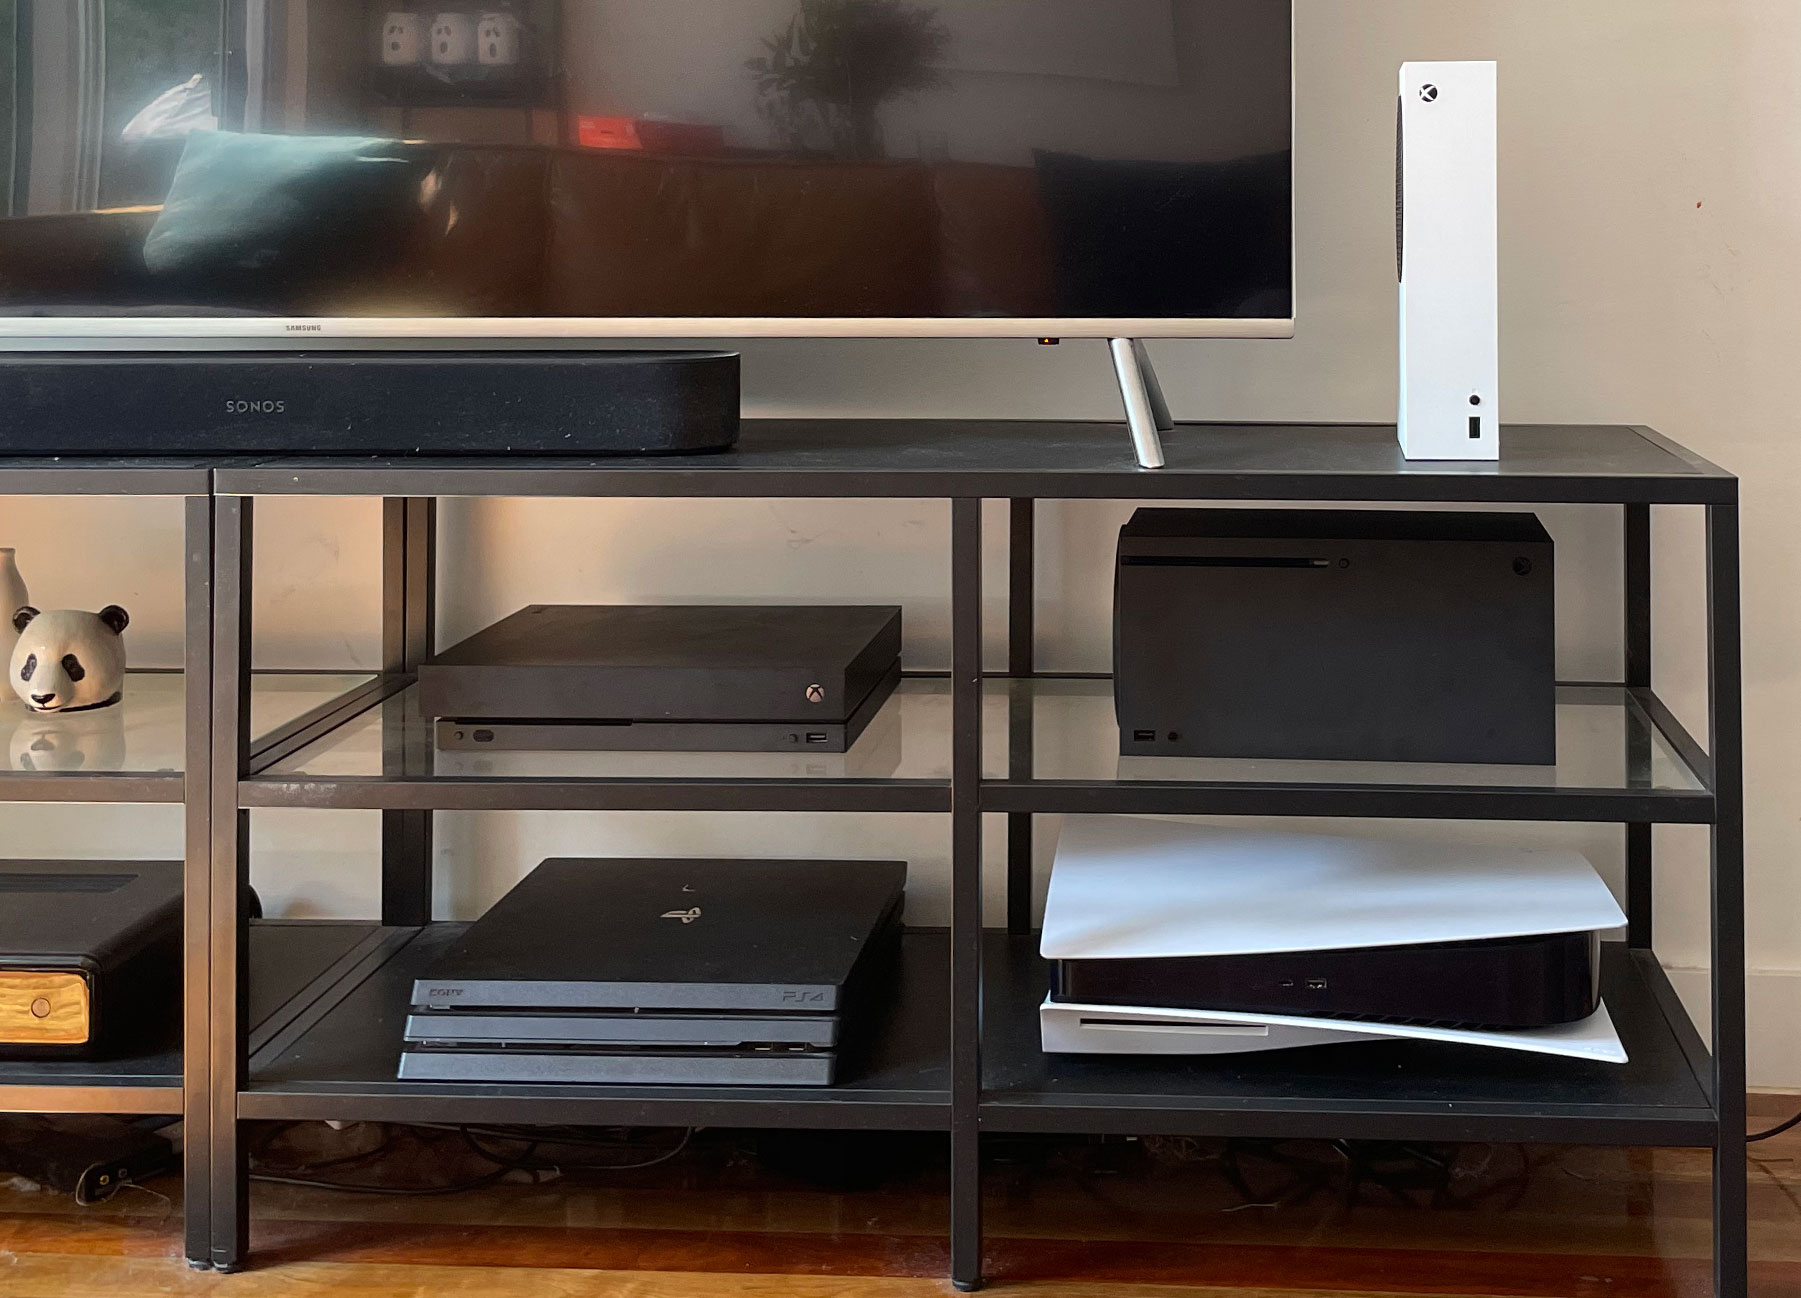 Here Is The Ps5 And Xbox Series X S Sitting In An Ikea Entertainment Unit In A Vertical Horizontal Orientation